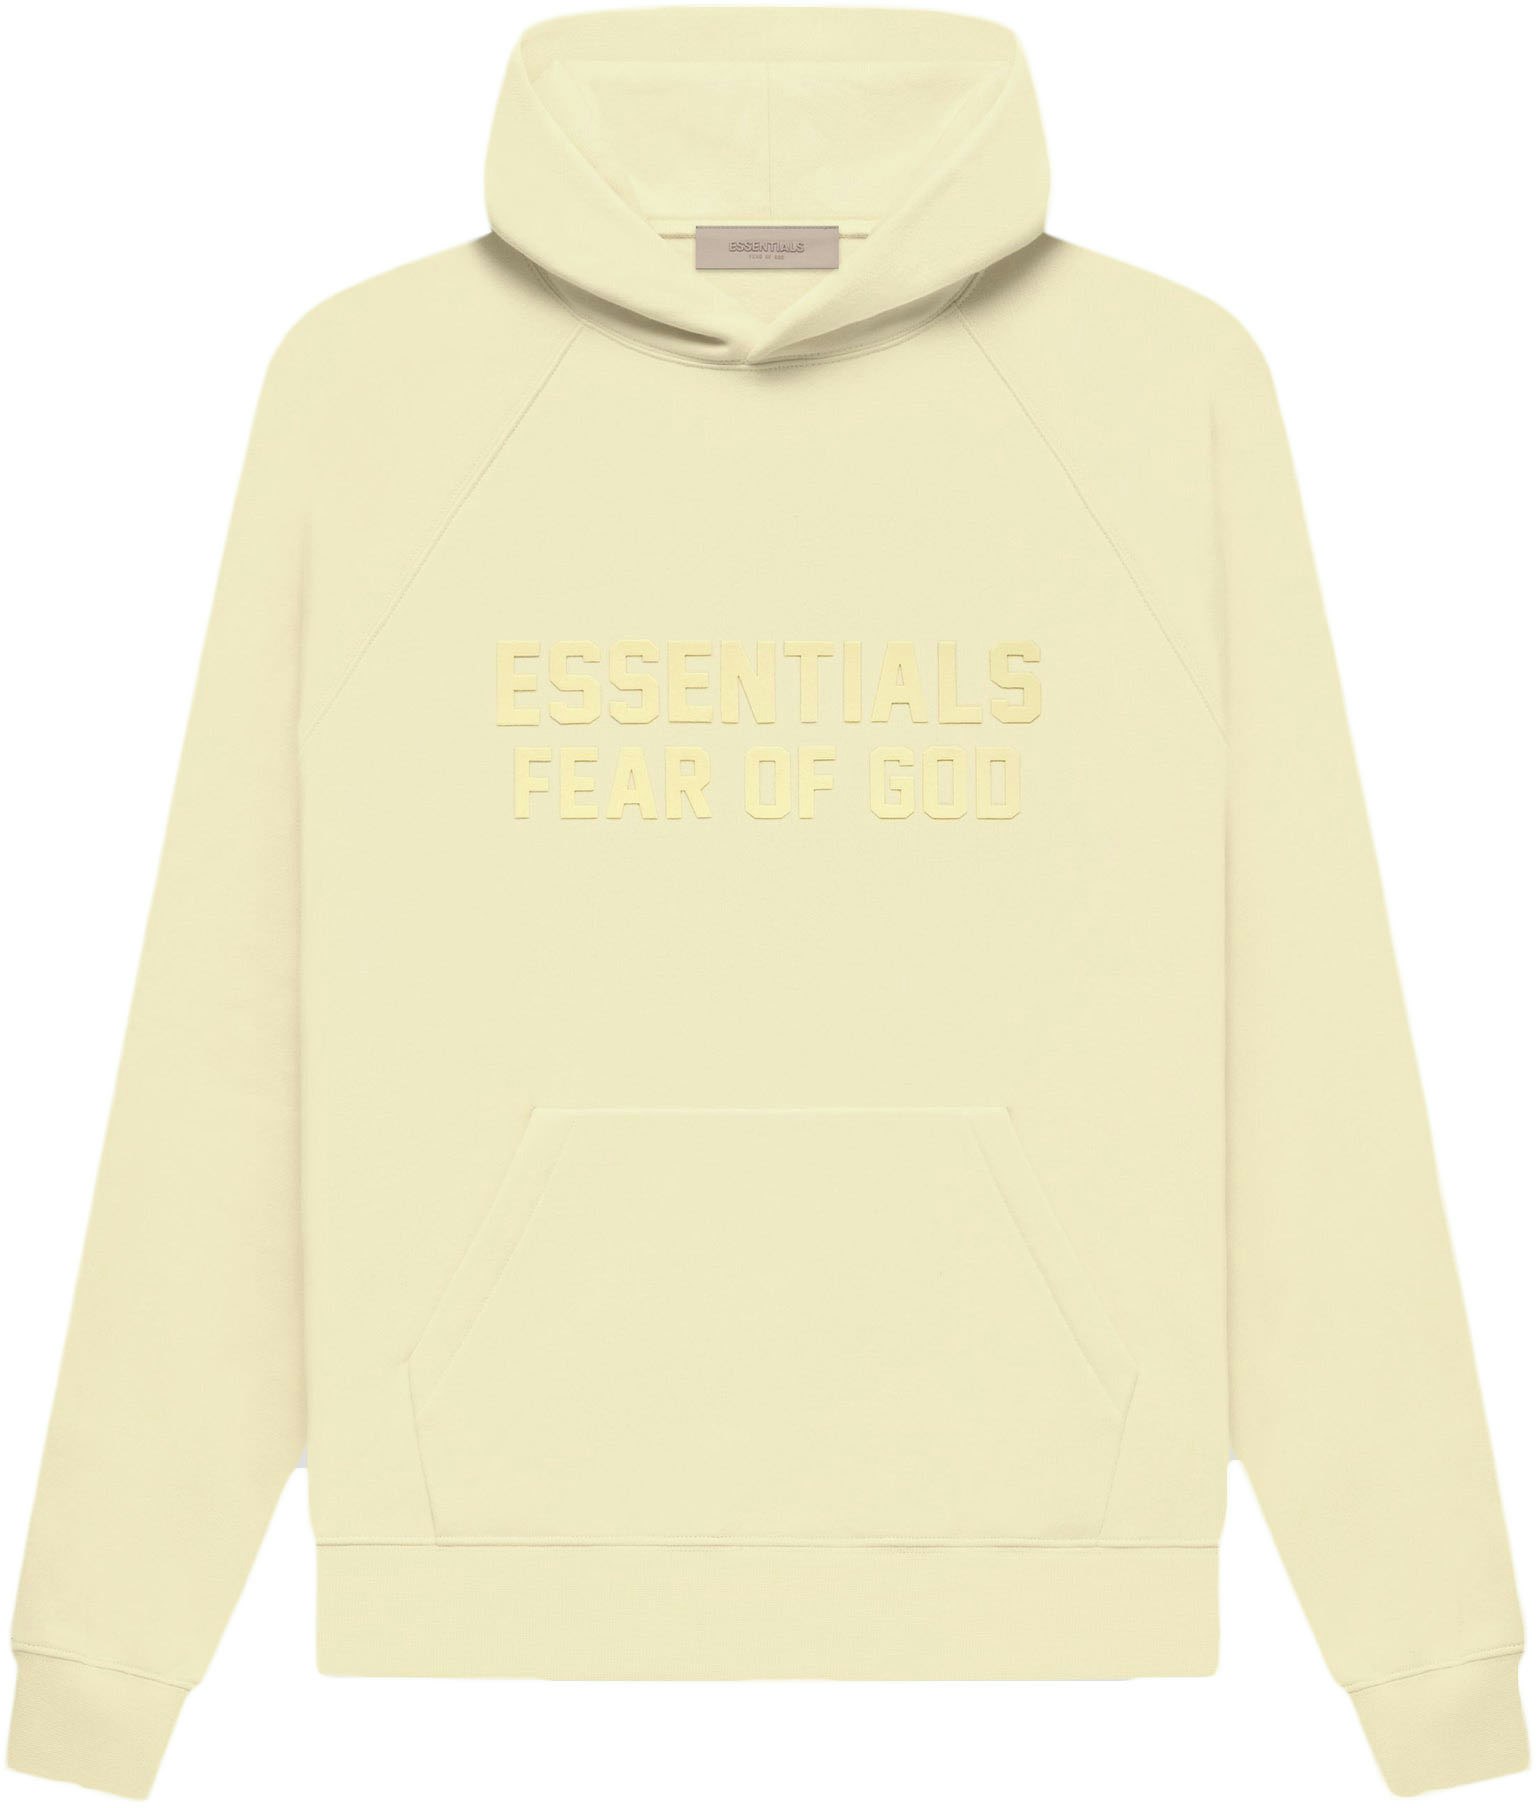 Fear of God Essentials Hoodie 'Canary' - Novelship